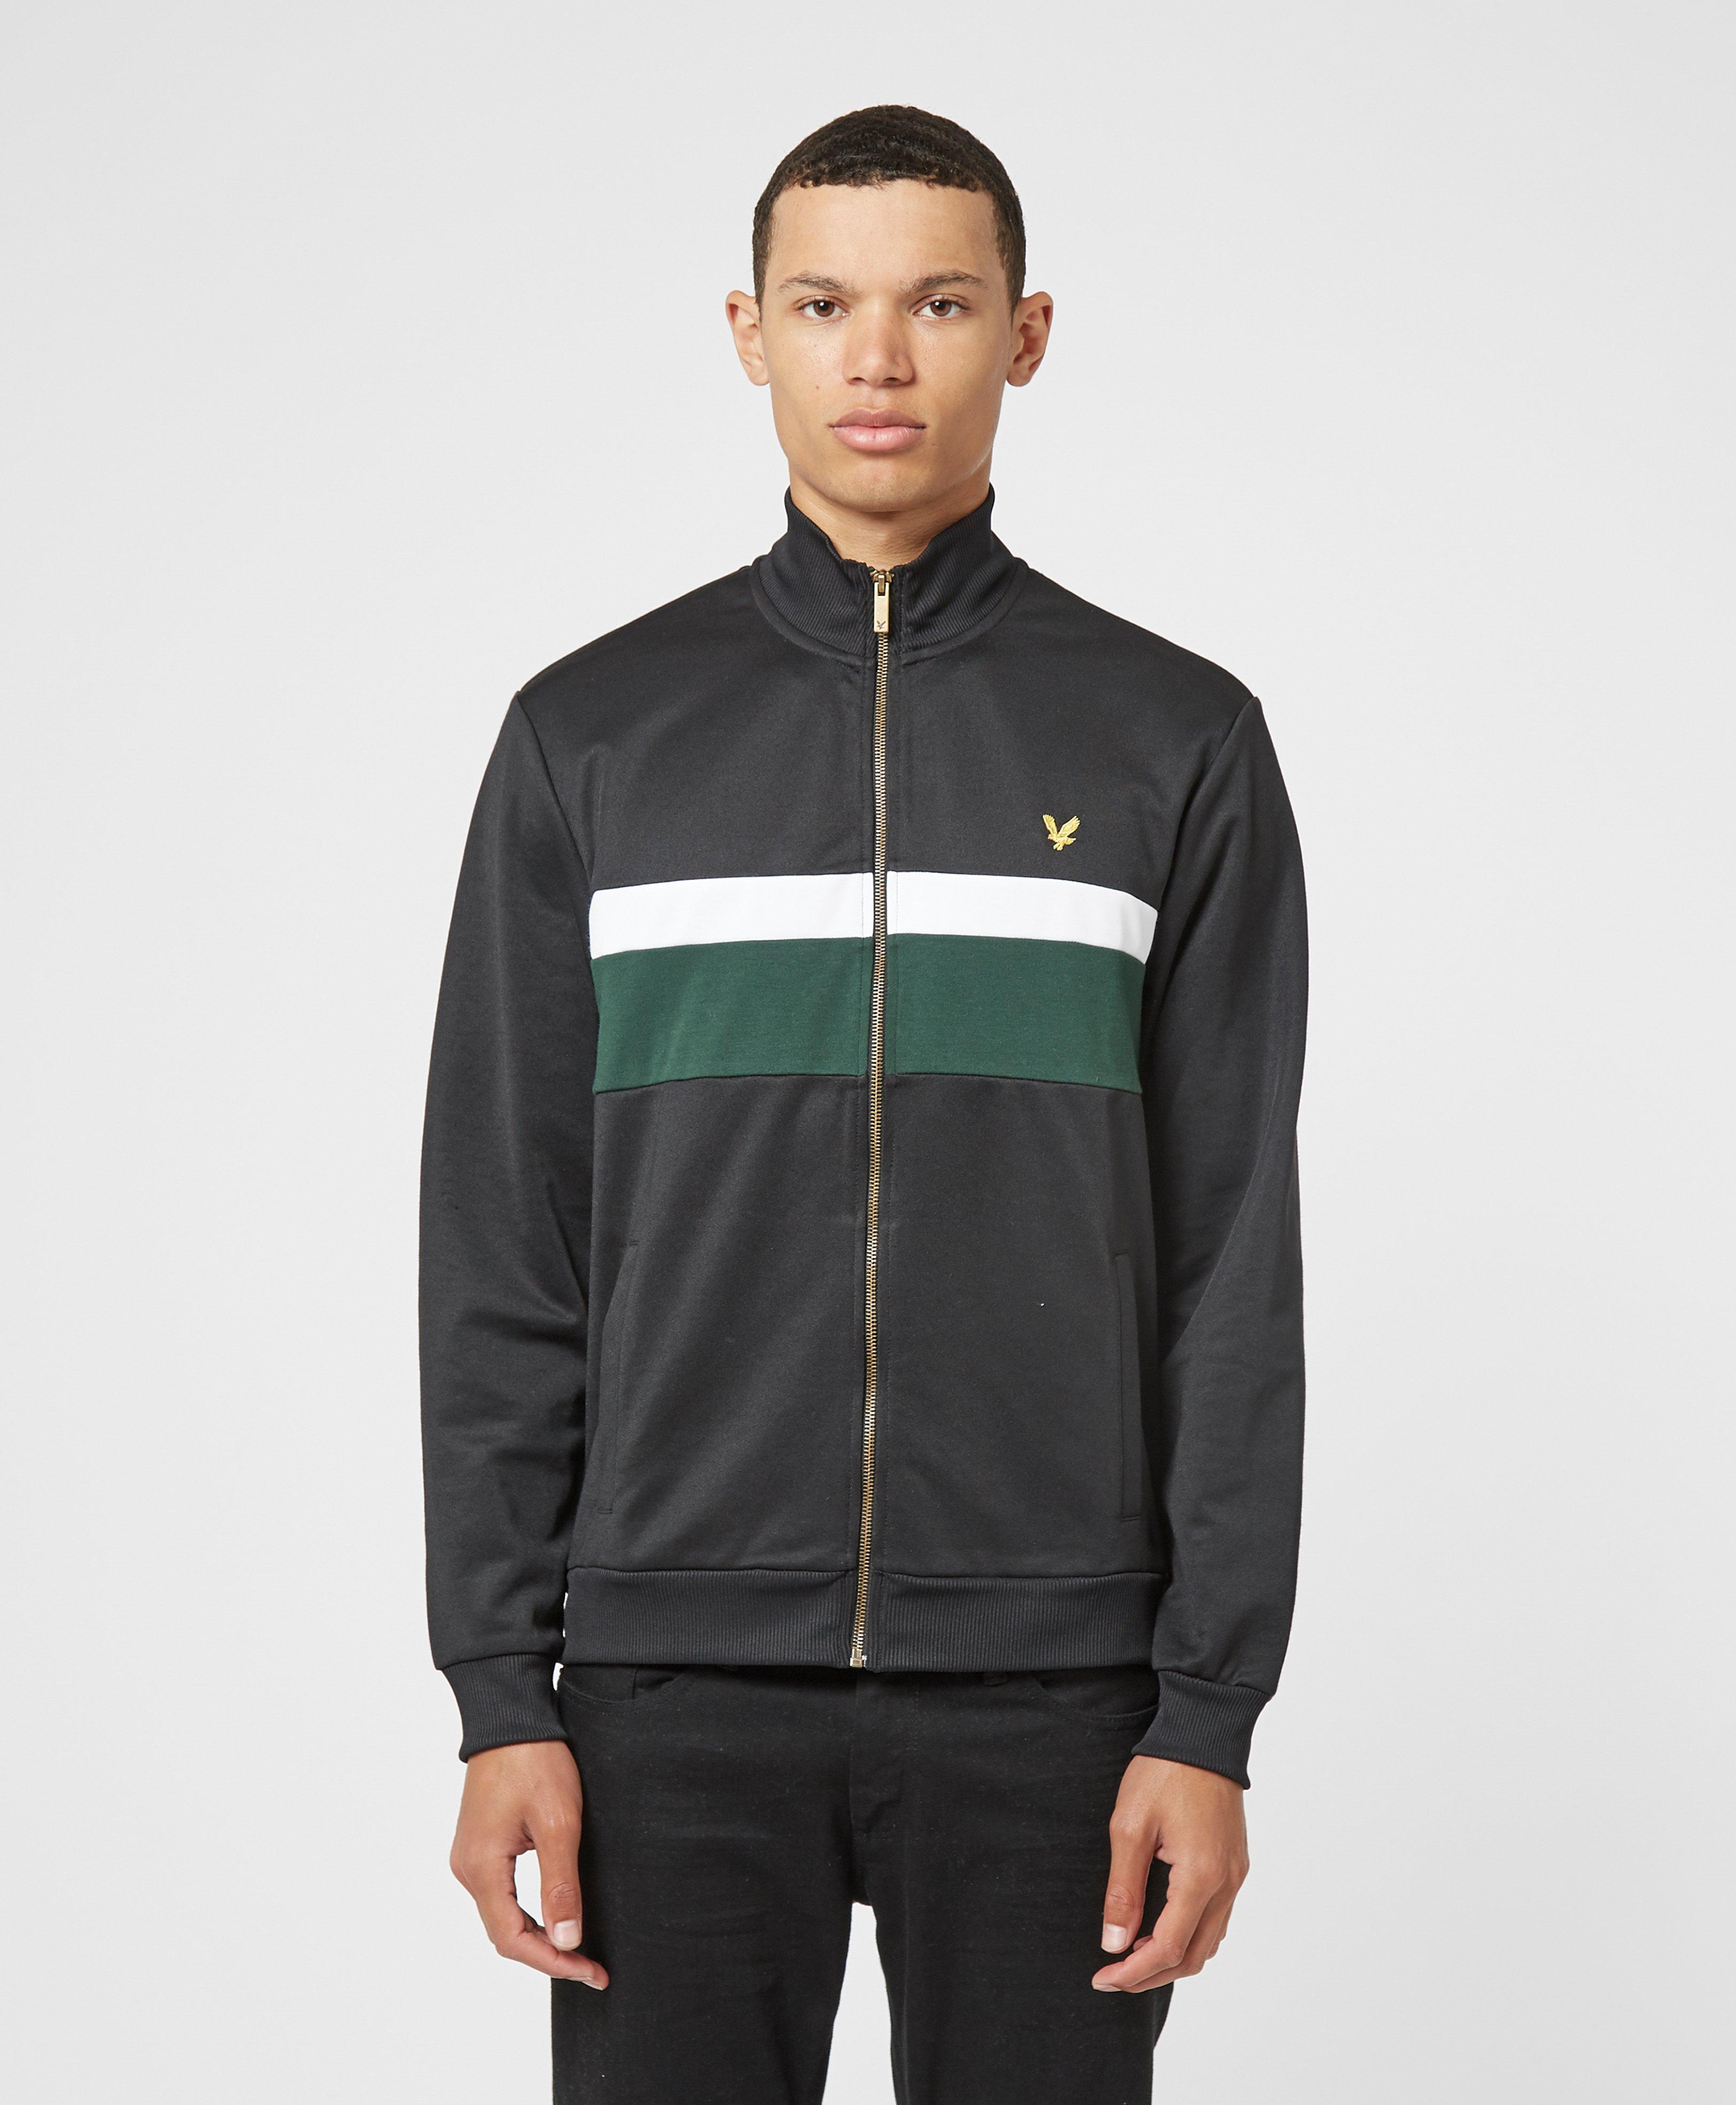 lyle and scott track top